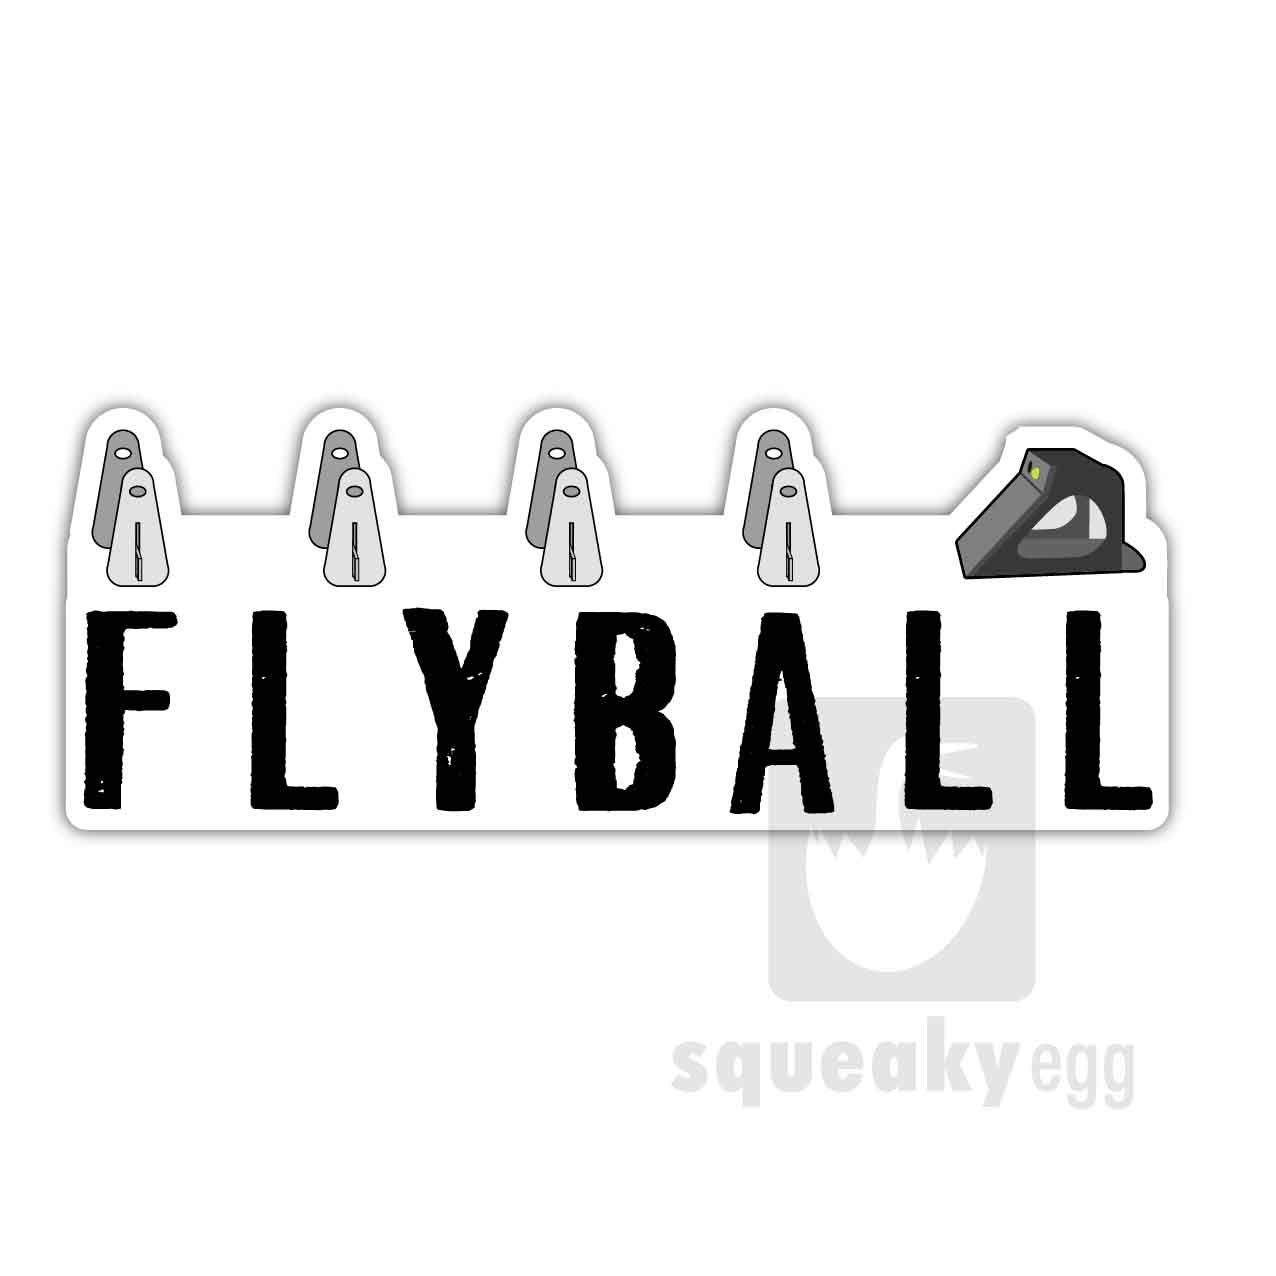 Flyball Logo - Amazon.com: Flyball Car Magnet - Dog Sport Flyball: Pet Supplies